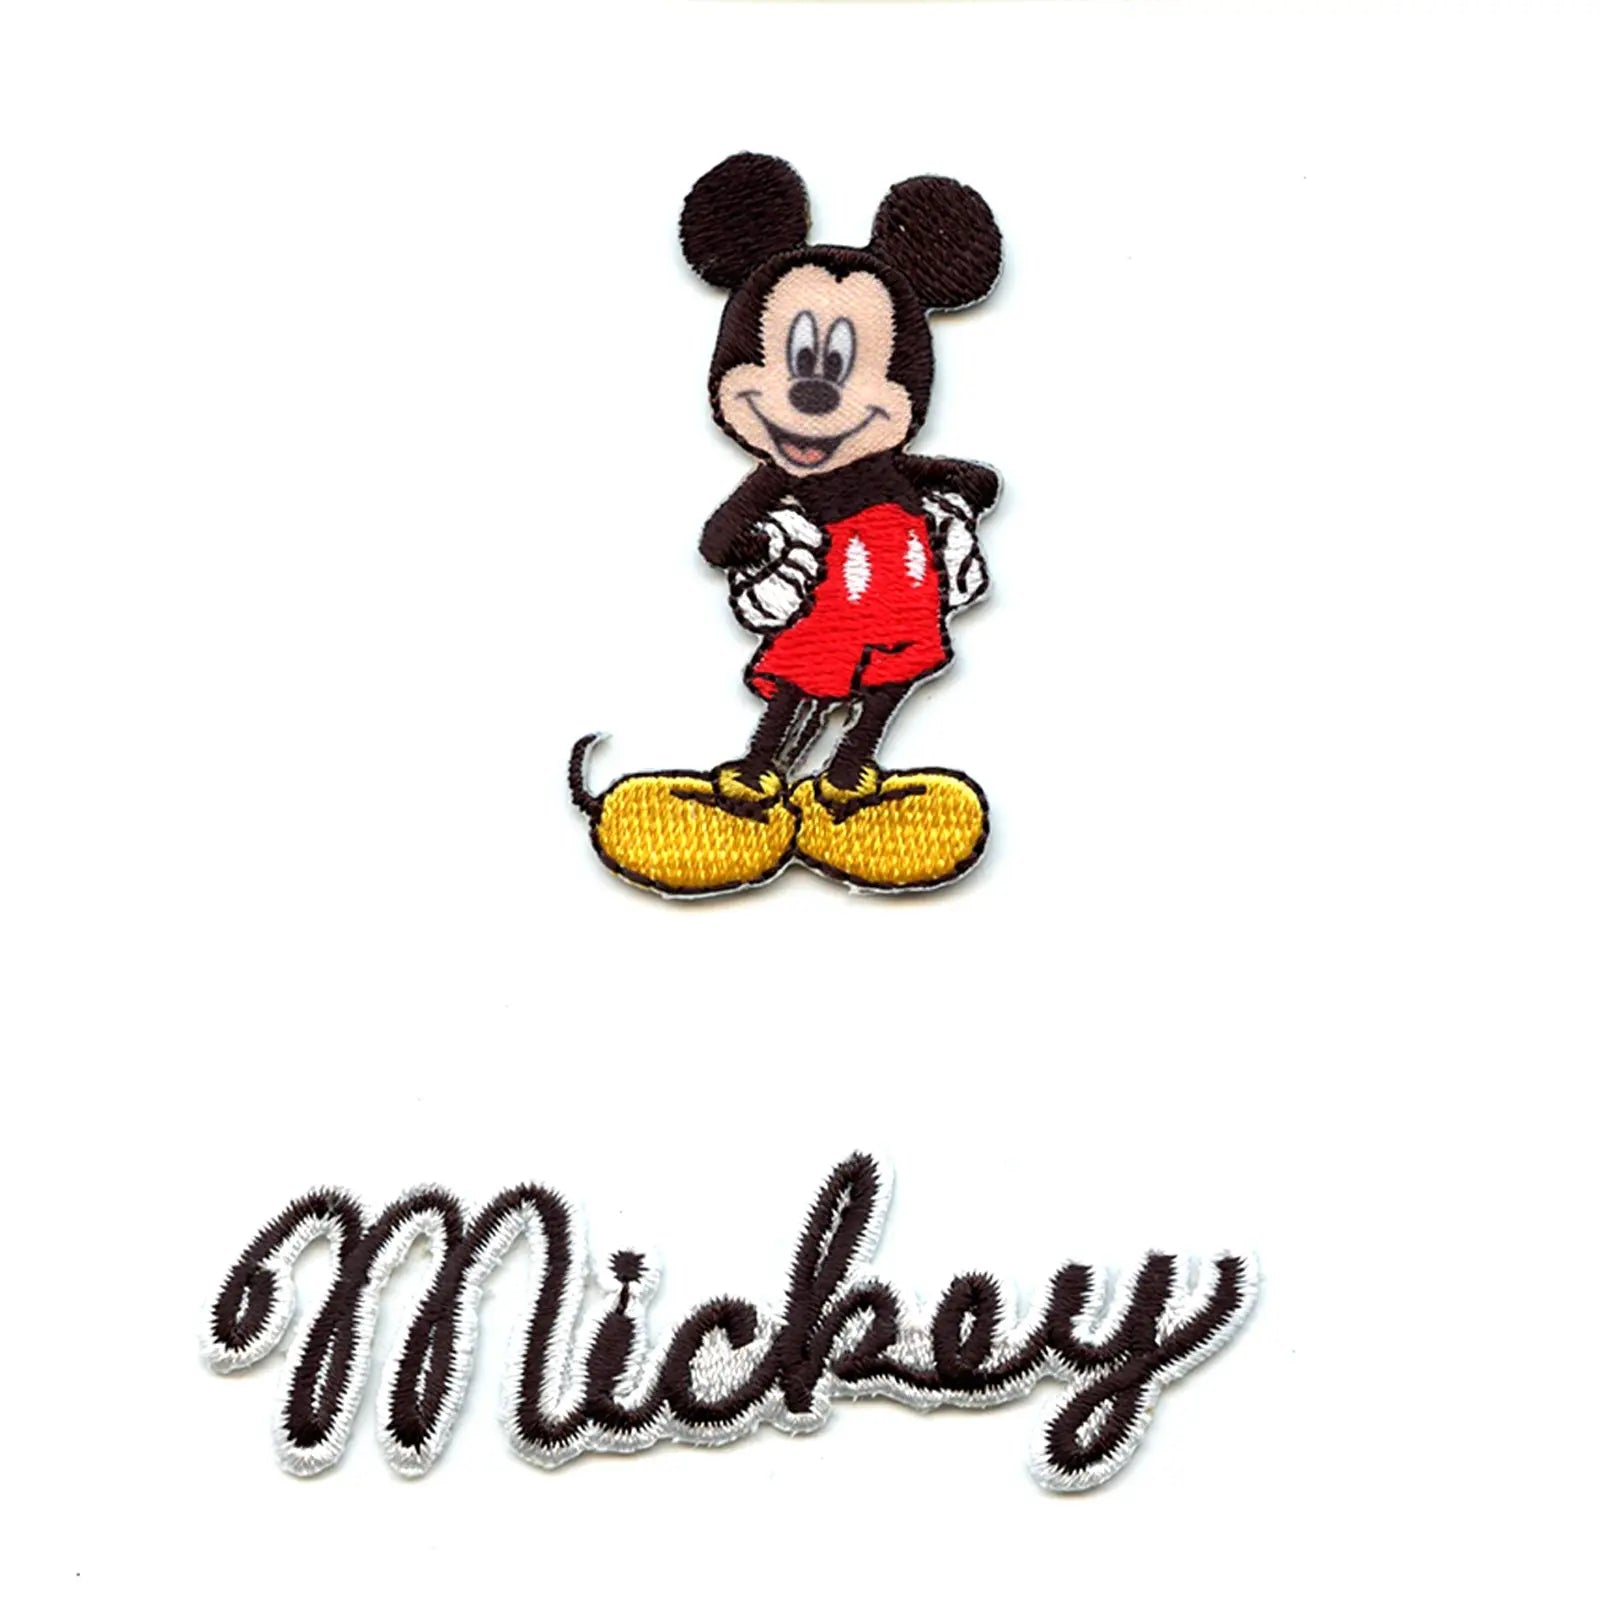 DISNEY BABY MICKEY MOUSE CHARACTER EMBROIDERED APPLIQUÉ PATCH SEW IRON ON